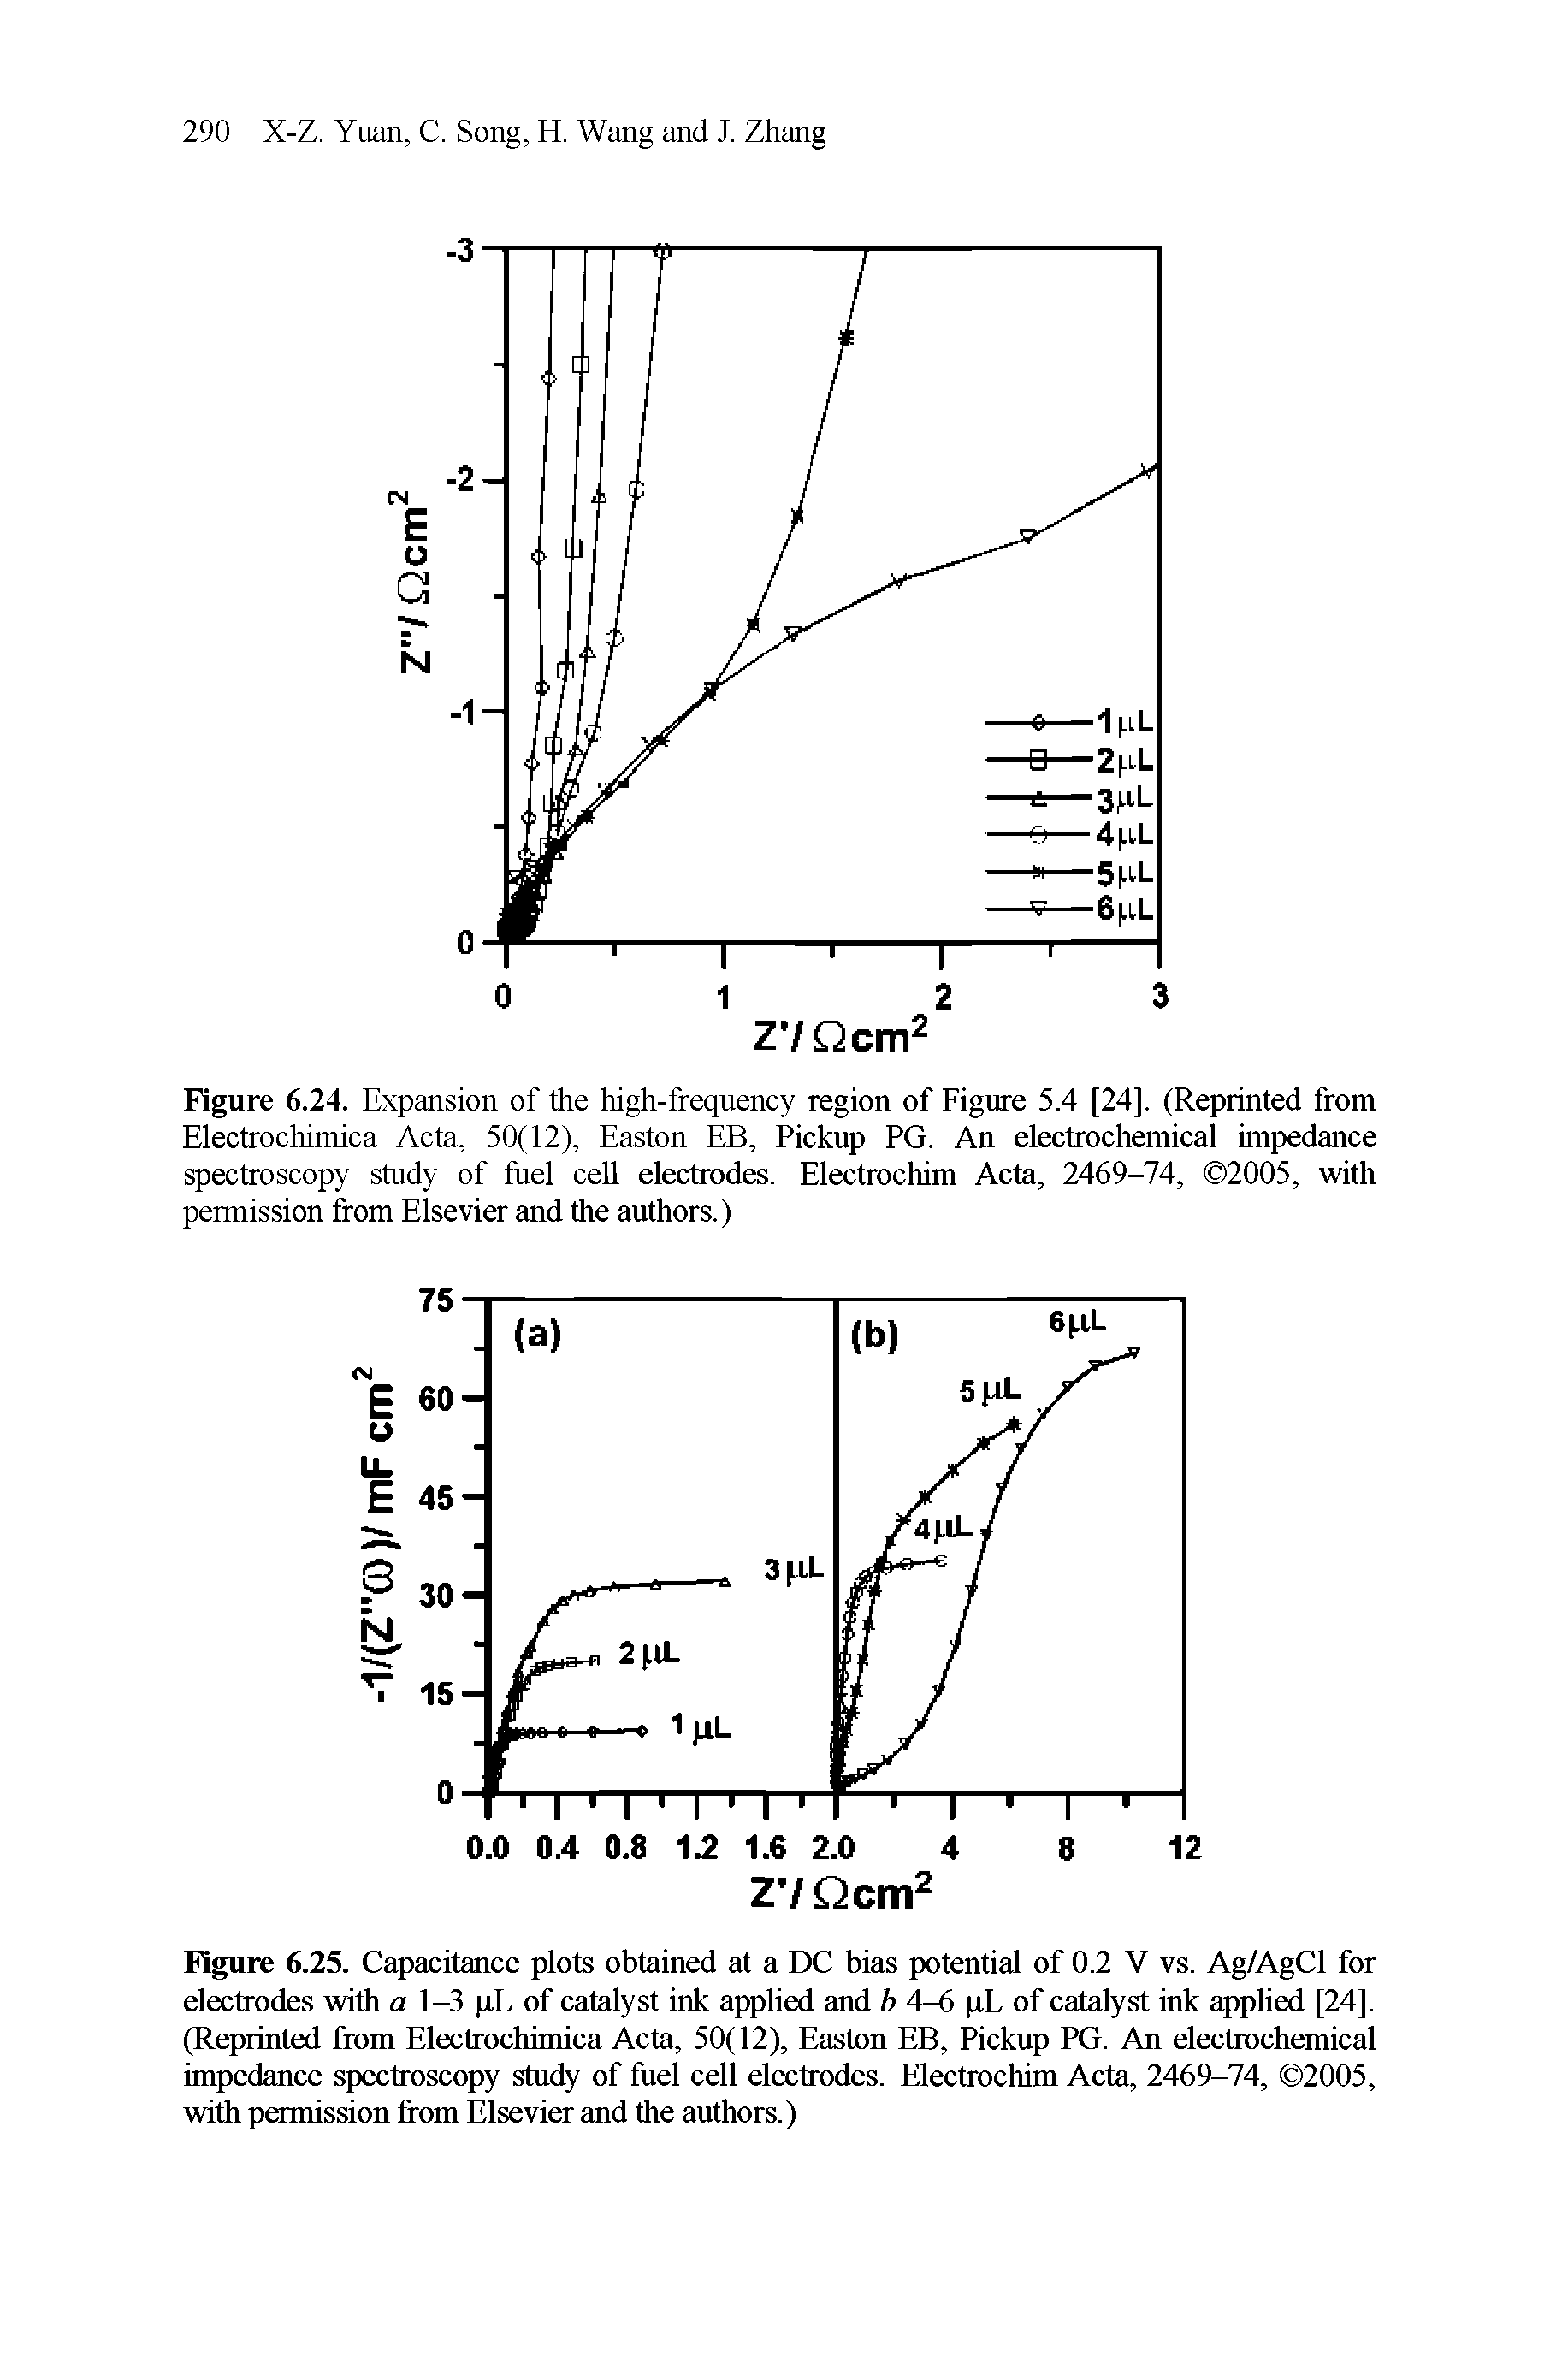 Figure 6.25. Capacitance plots obtained at a DC bias potential of 0.2 V vs. Ag/AgCl for electrodes with a 1-3 xL of catalyst ink applied and b 4-6 rL of catalyst ink applied [24], (Reprinted from Electrochimica Acta, 50(12), Easton EB, Pickup PG. An electrochemical impedance spectroscopy study of fuel cell electrodes. Electrochim Acta, 2469-74, 2005, with permission from Elsevier and the authors.)...